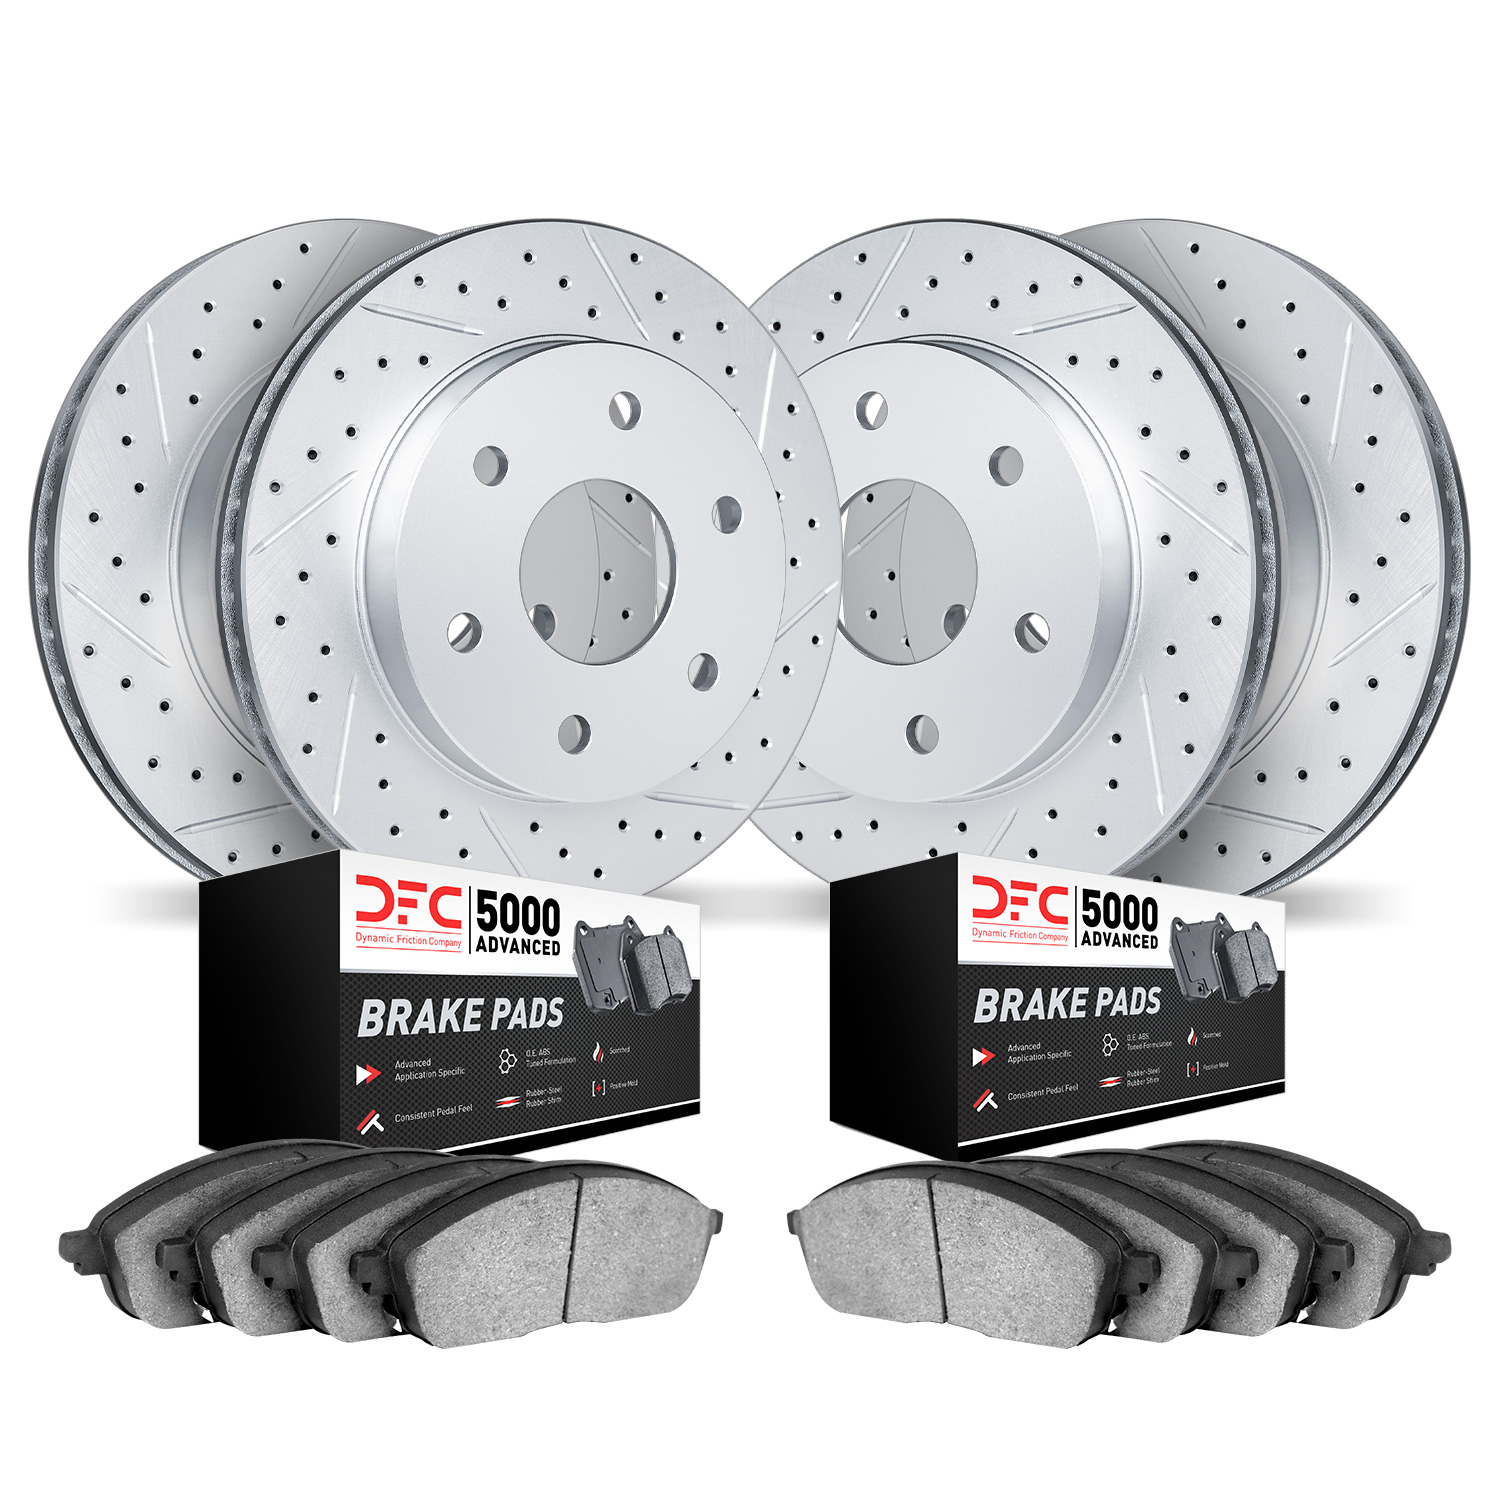 2504-54316 Geoperformance Drilled/Slotted Rotors w/5000 Advanced Brake Pads Kit, Fits Select Ford/Lincoln/Mercury/Mazda, Positio